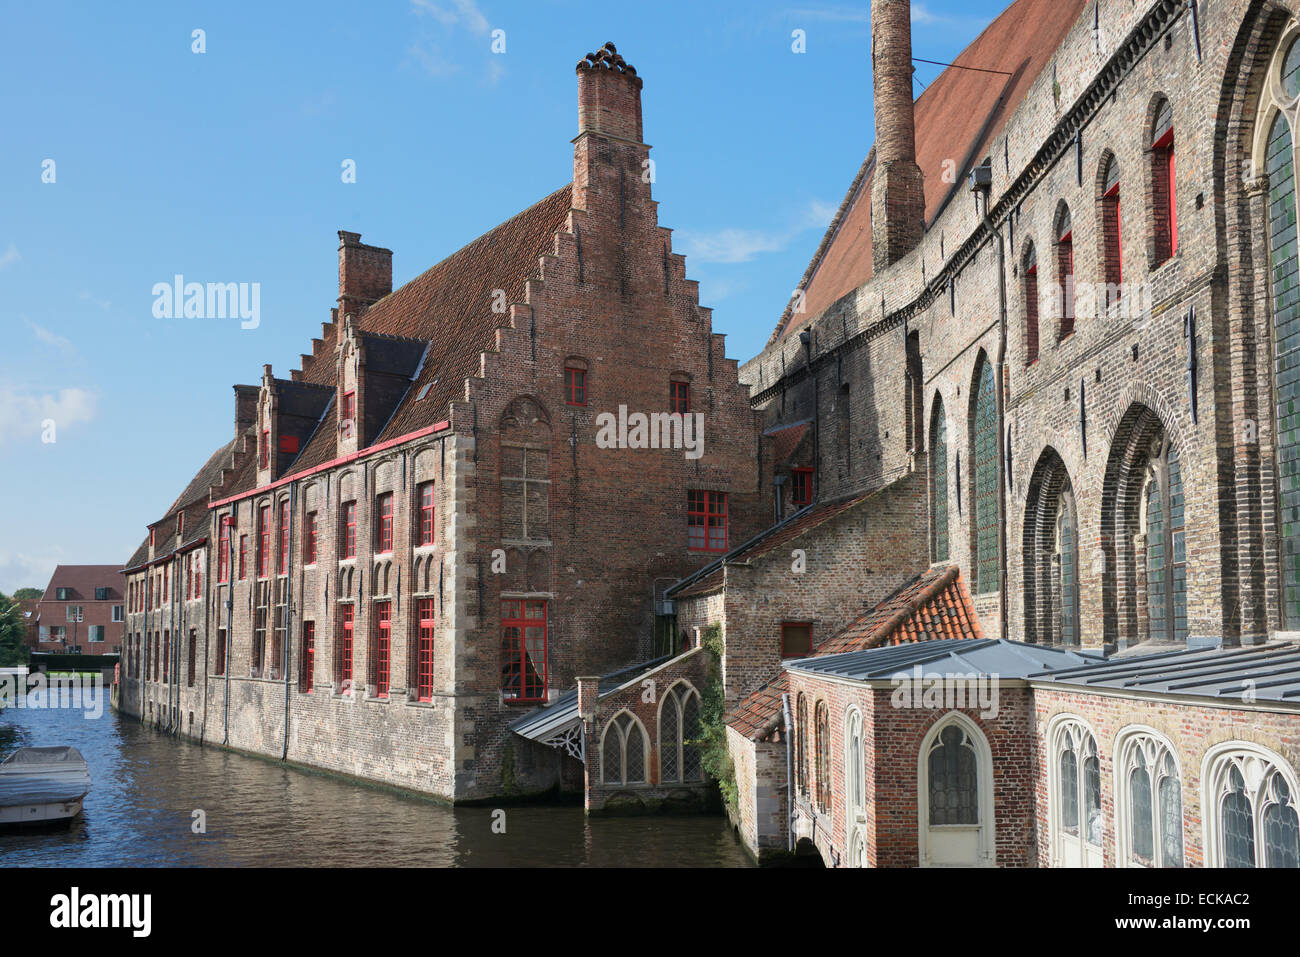 Canalside church and fine example of Dutch gabled buildings Bruges Belgium Stock Photo